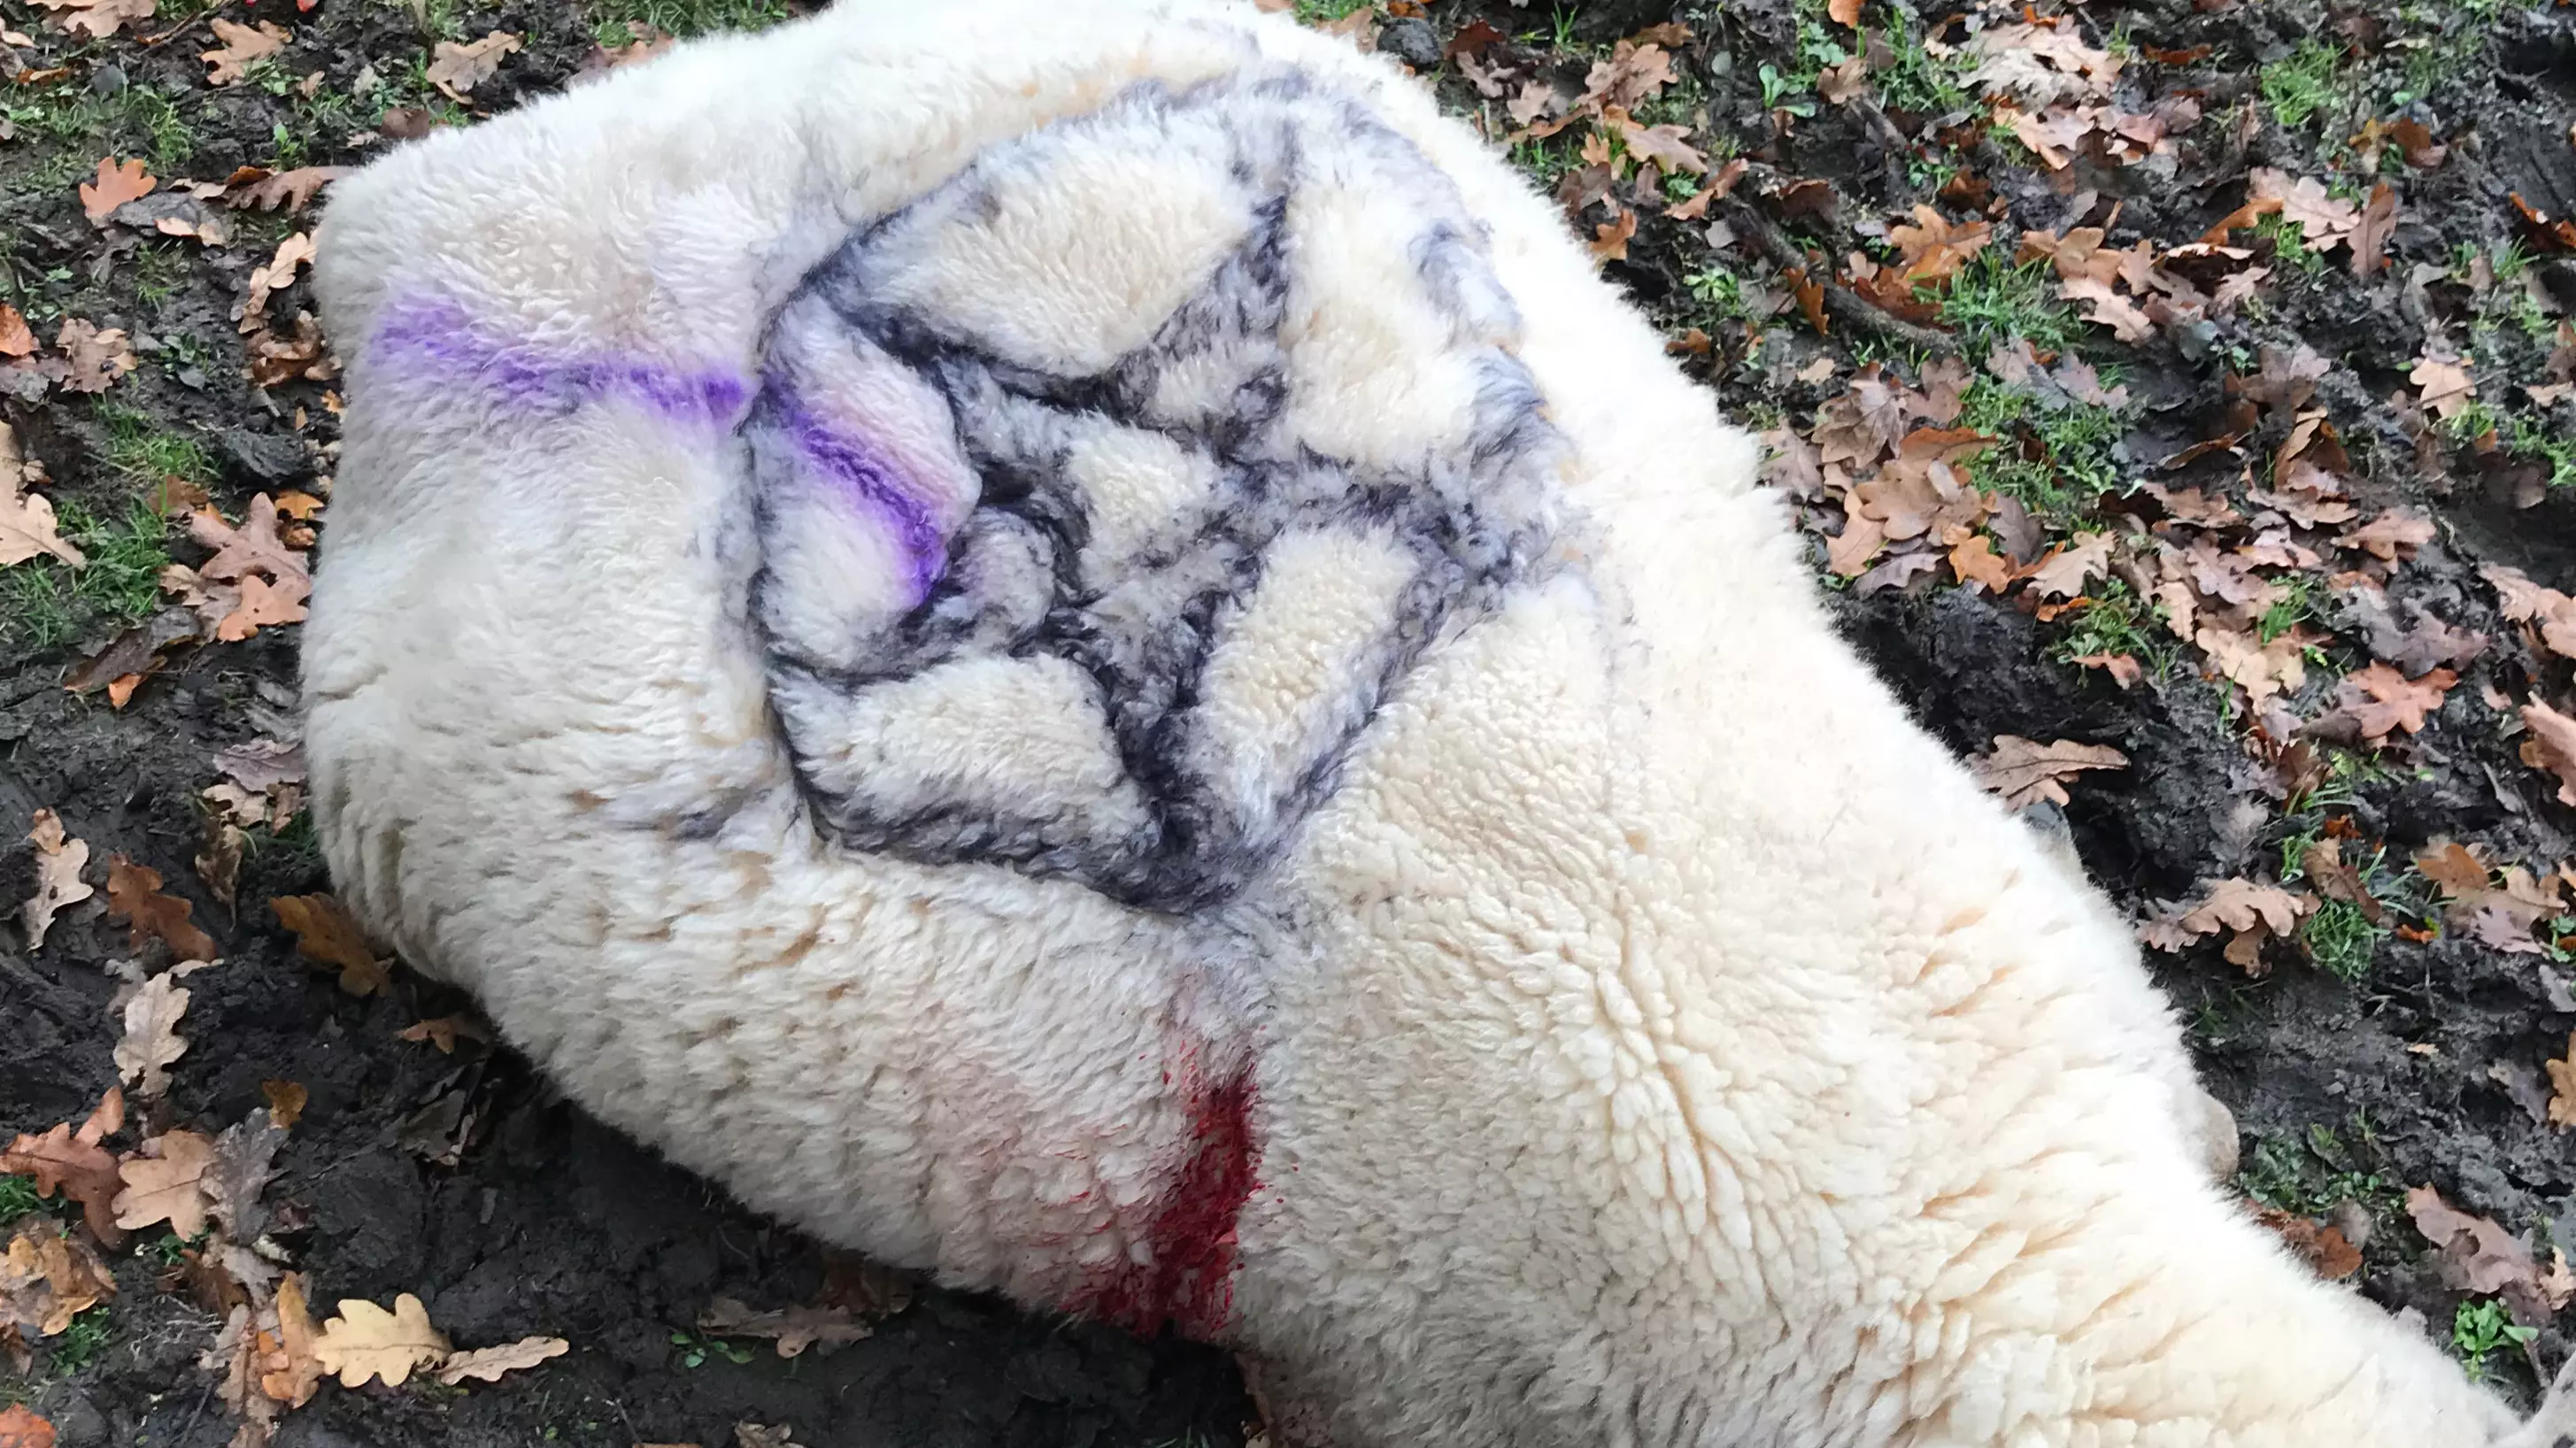 Residents Worried After Two Sheep Stabbed To Death And Marked With Pentagrams